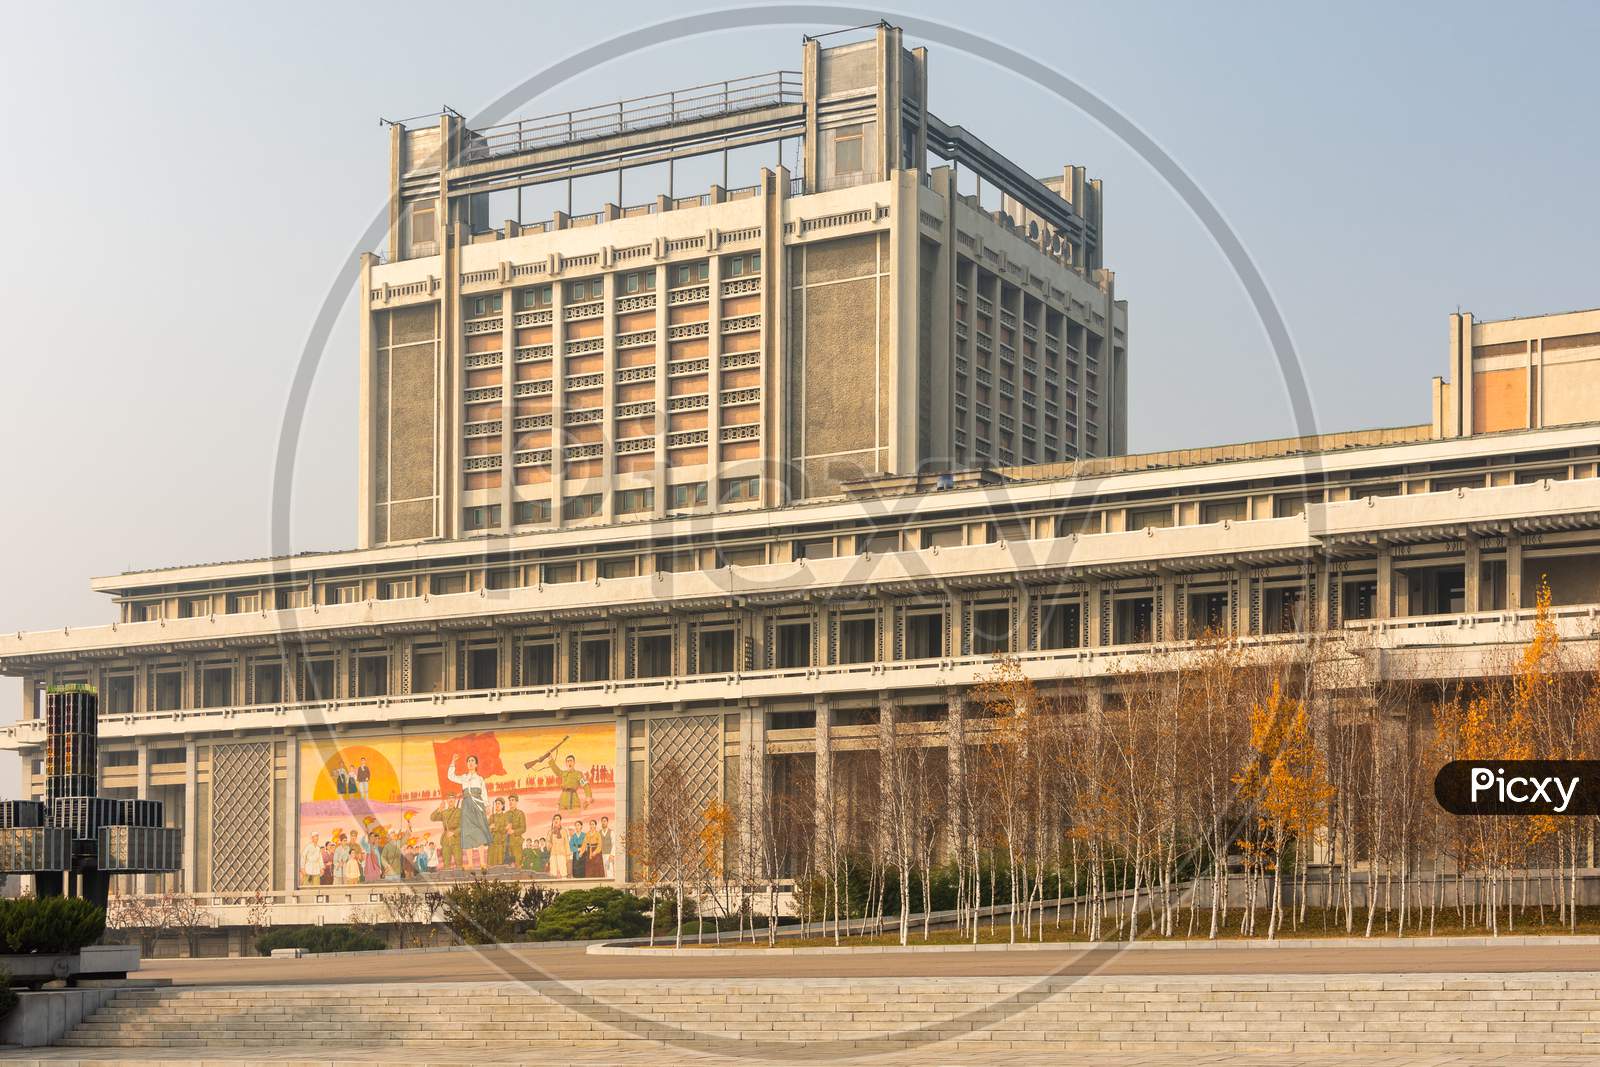 Building Decorated With Revolutionary Symbols And Slogans In Pyongyang, North Korea